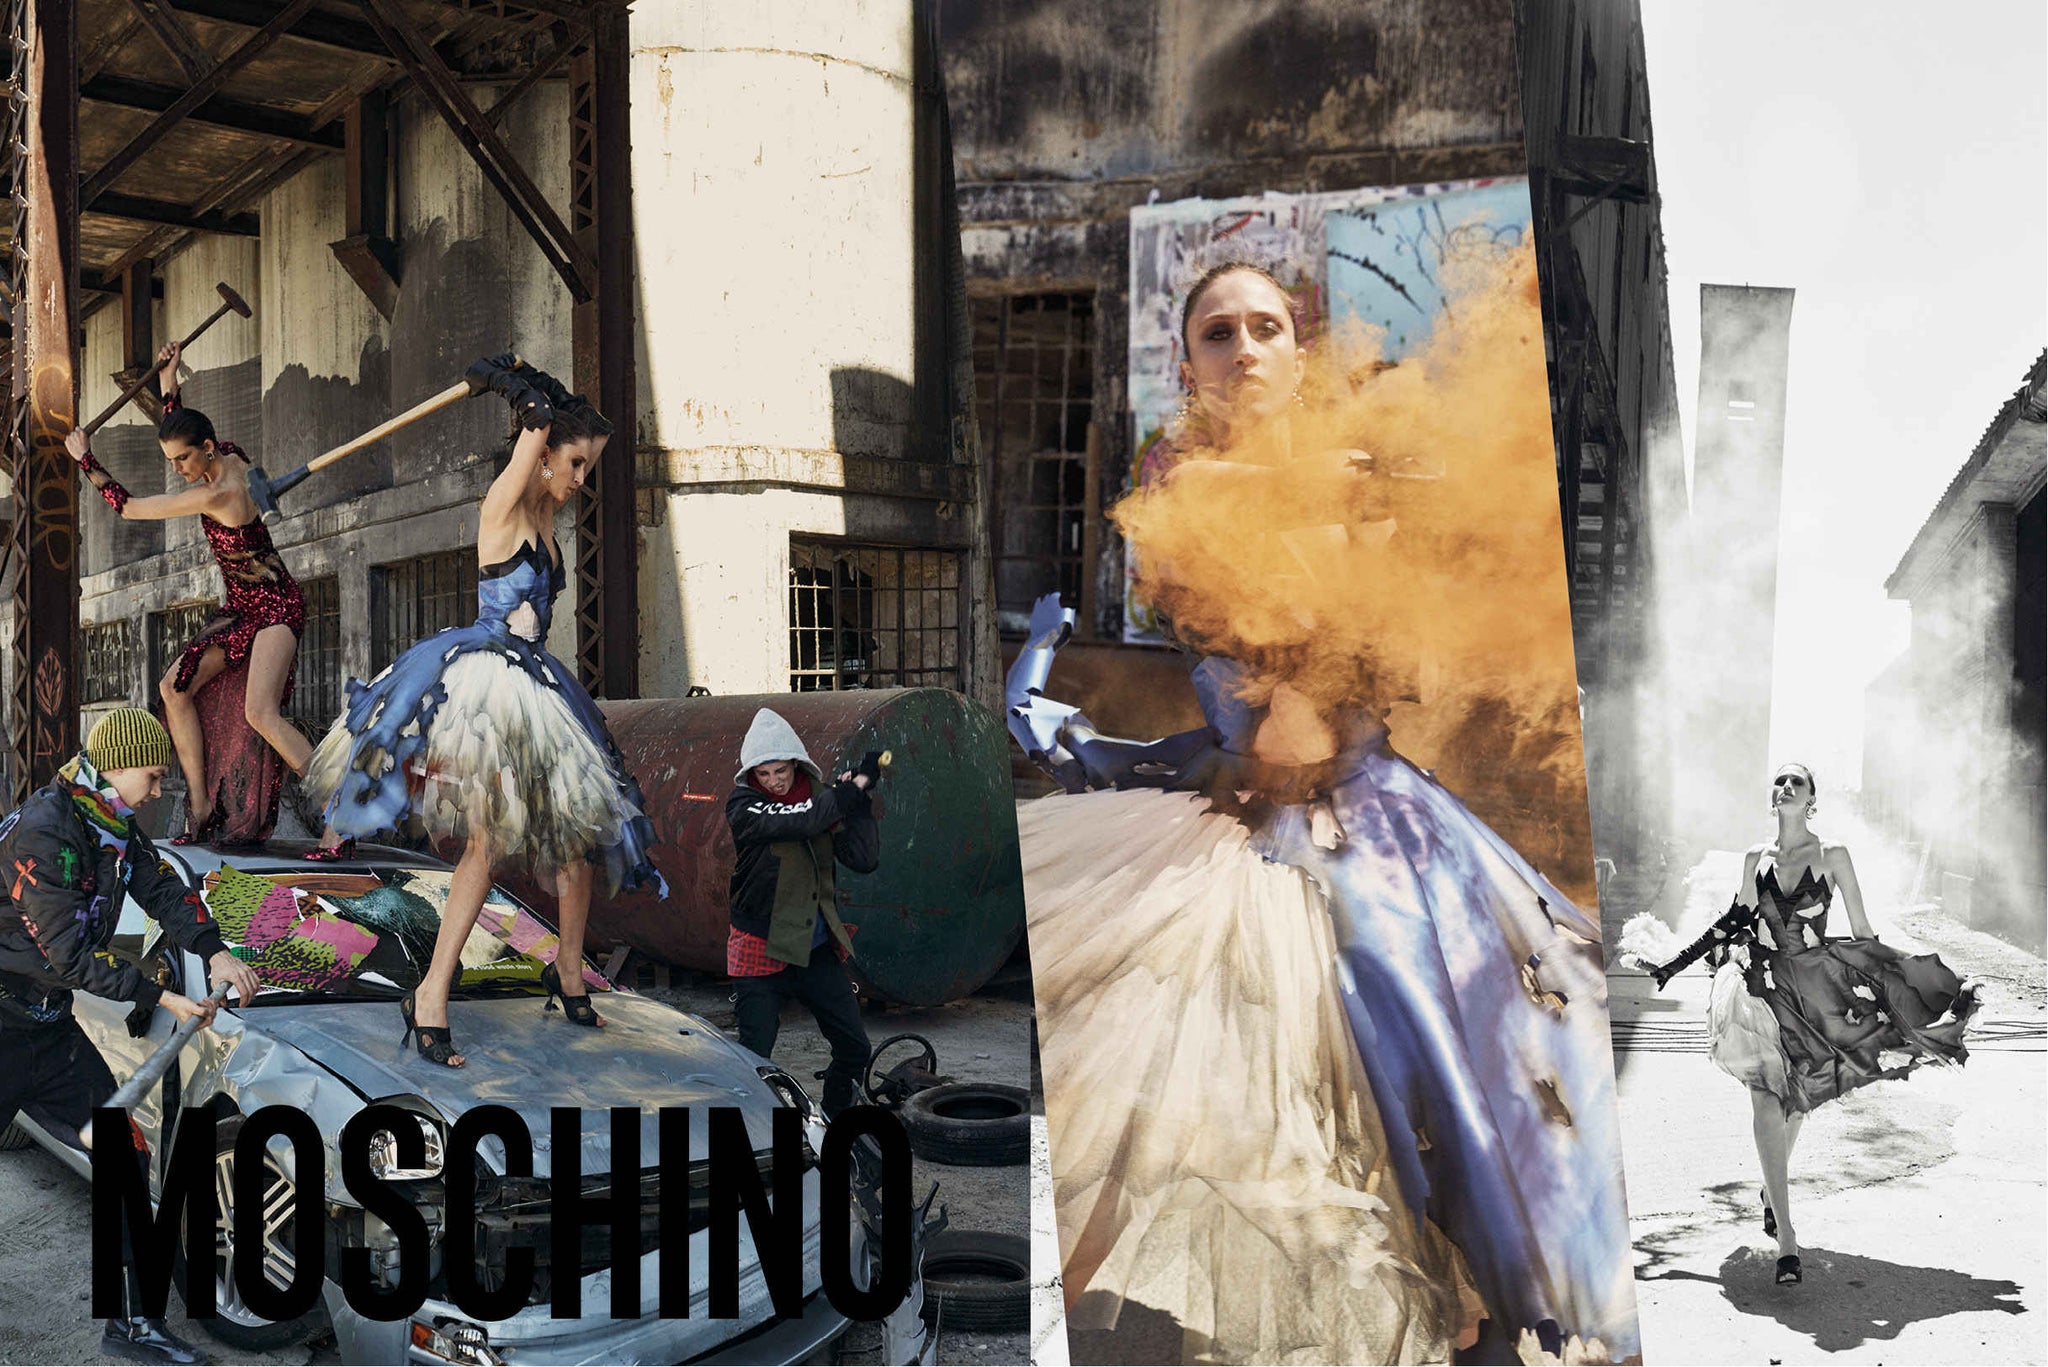 HOW MOSCHINO’S LATEST CAMPAIGN ECHOES CHAOS, BURNING DRESSES AND ALL.